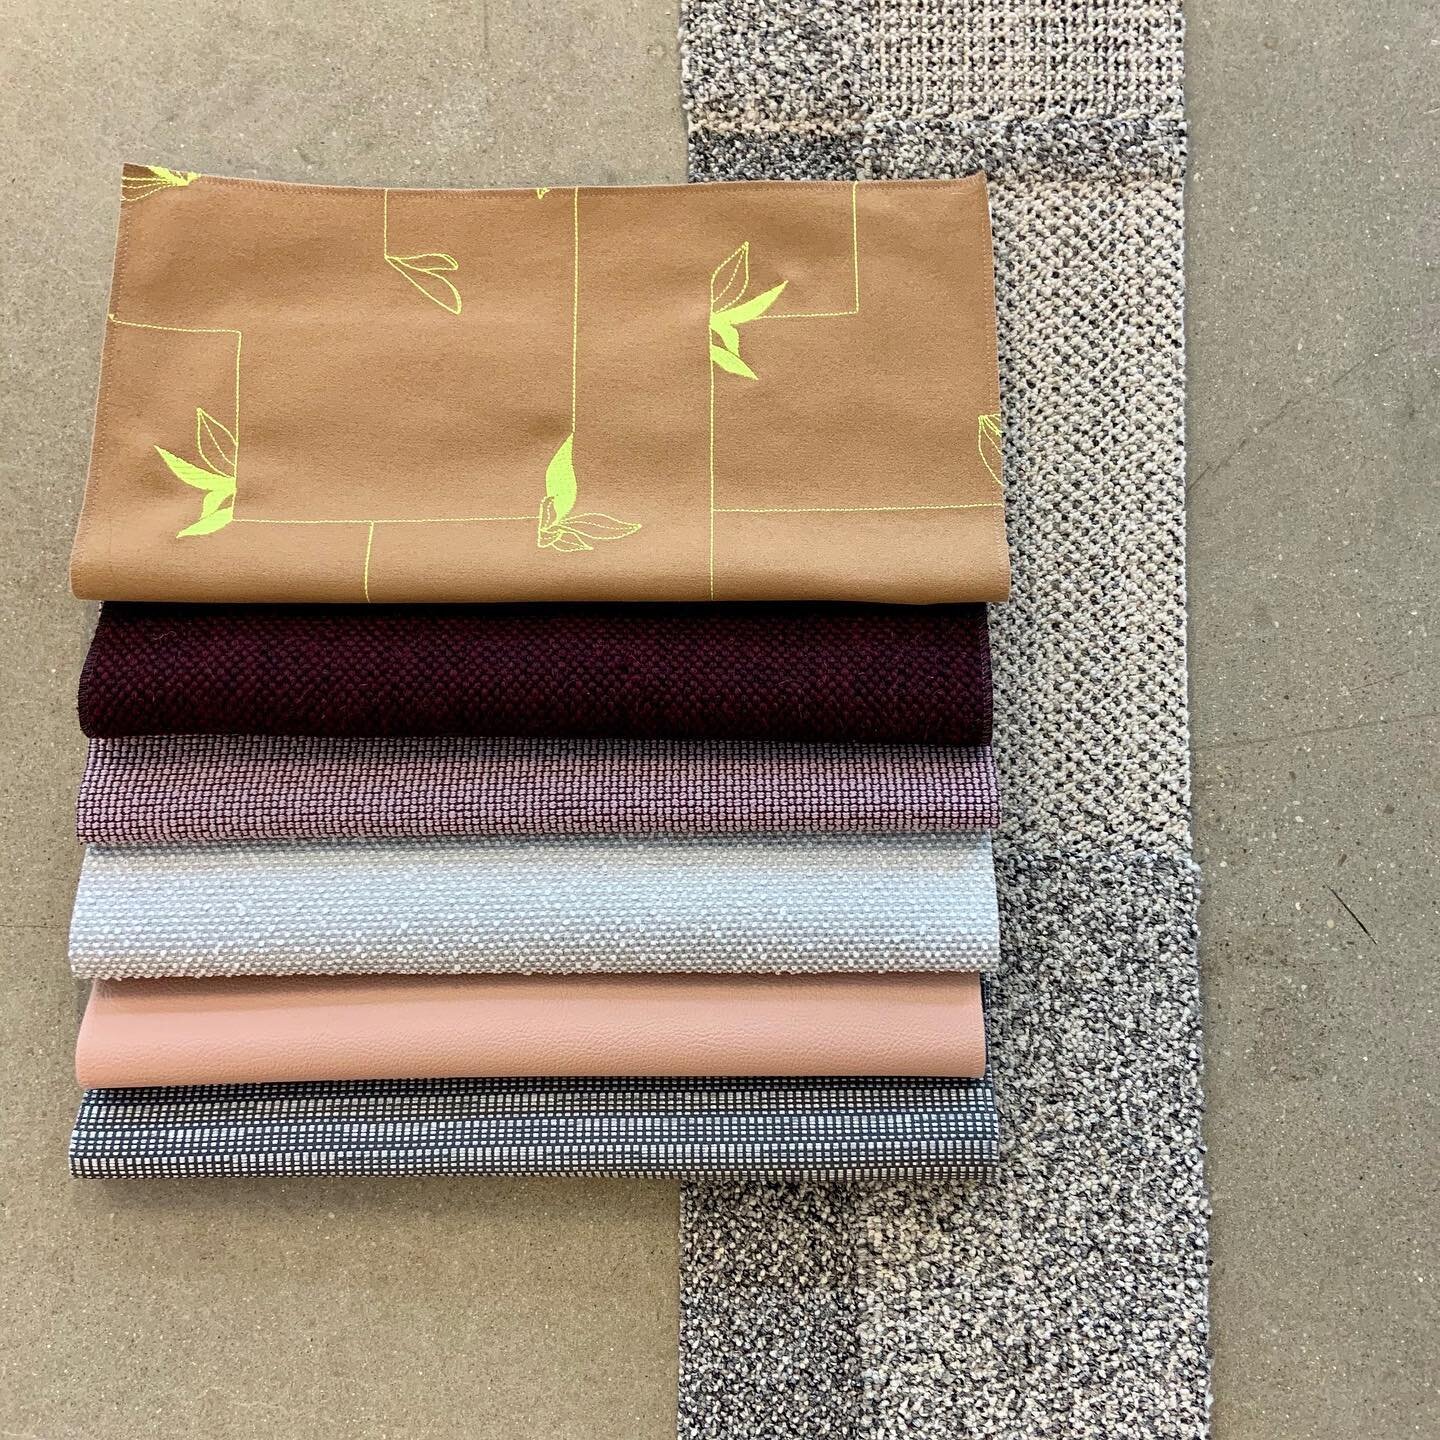 Flat Lay Friday! New Fall 2020 collection 🥰⠀
Featured top to bottom @luumtextiles:⠀
Second Nature⠀
Fleece⠀
Ample⠀
Rhetoric⠀
Decoy⠀
Stratiform ⠀
⠀
#flatlayfriday